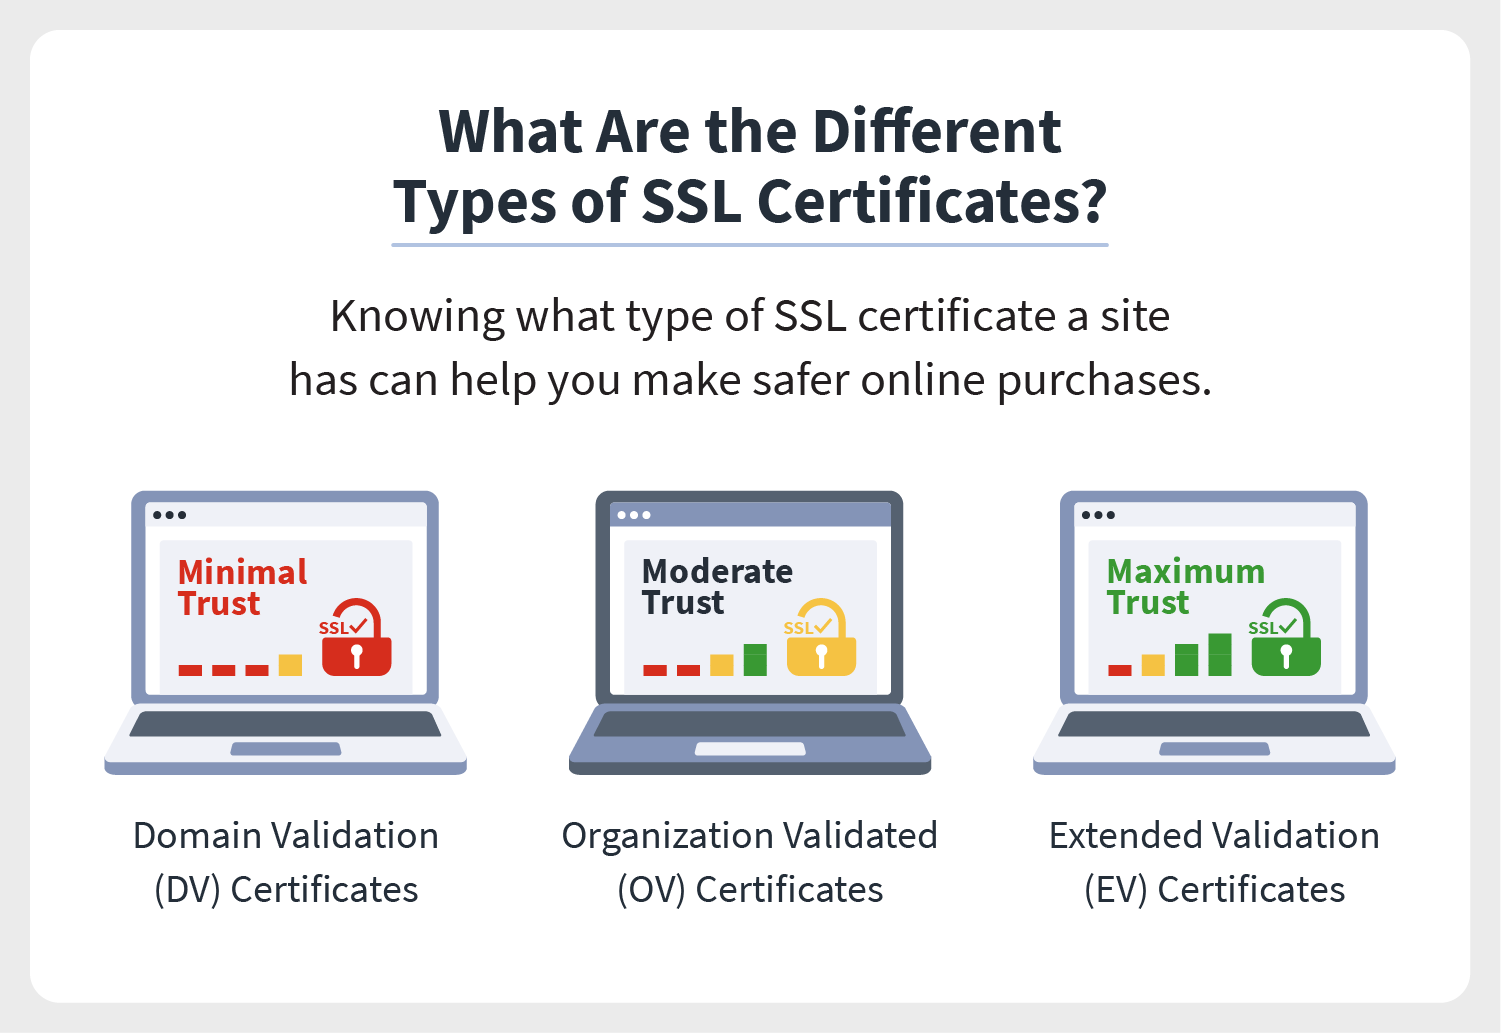 Illustrated laptops show varying trust levels associated with three types of SSL certificates: minimal trust for DV certificates, moderate trust for OV certificates, and maximum trust for EV certificates.